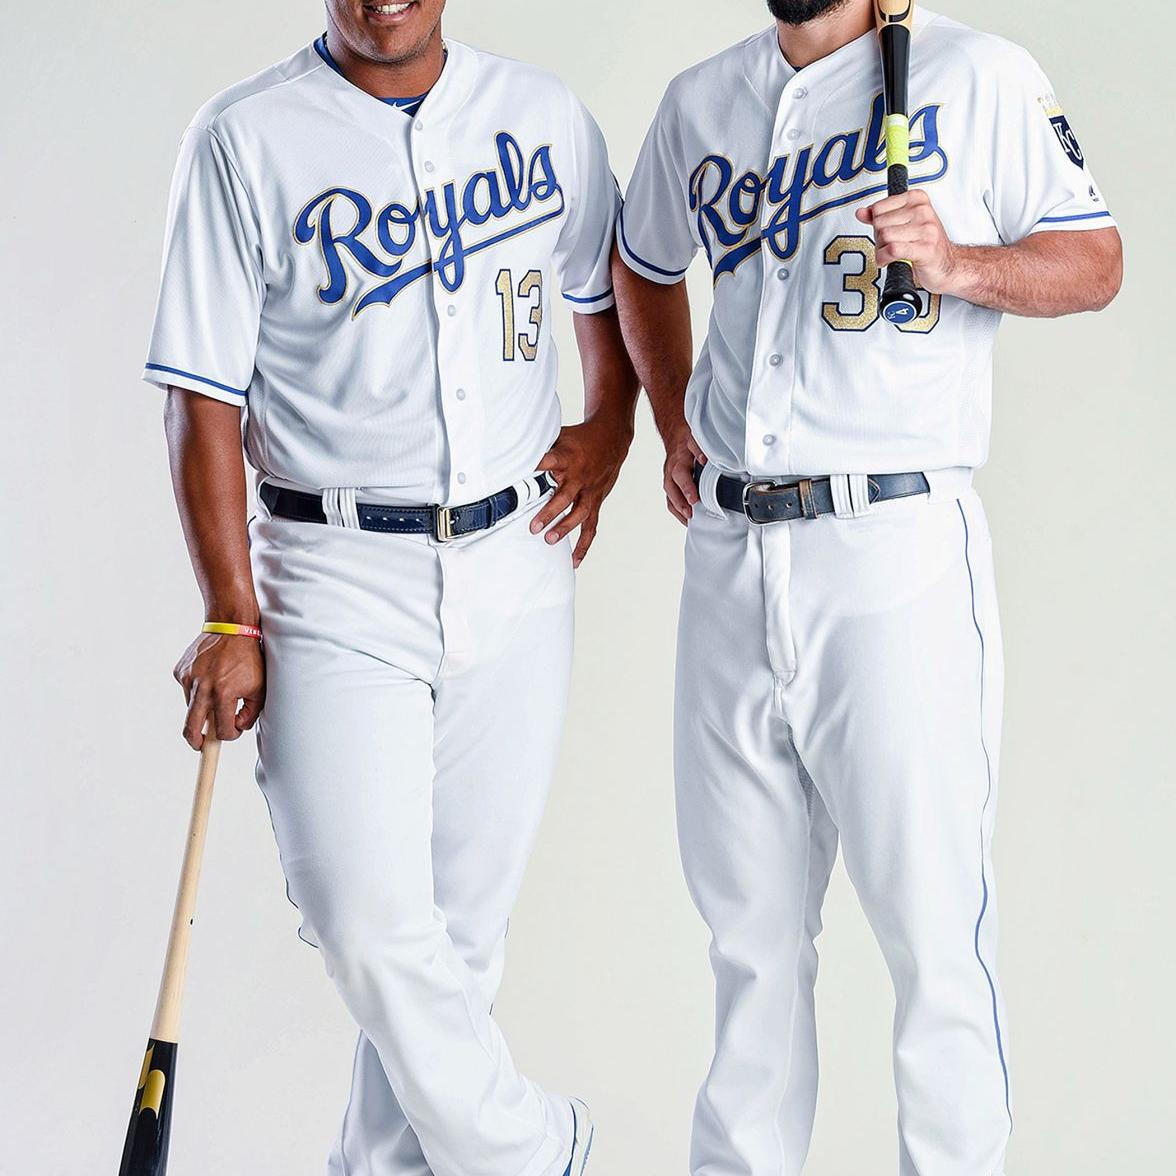 Royals going with gold trimmed uniforms for Friday home games